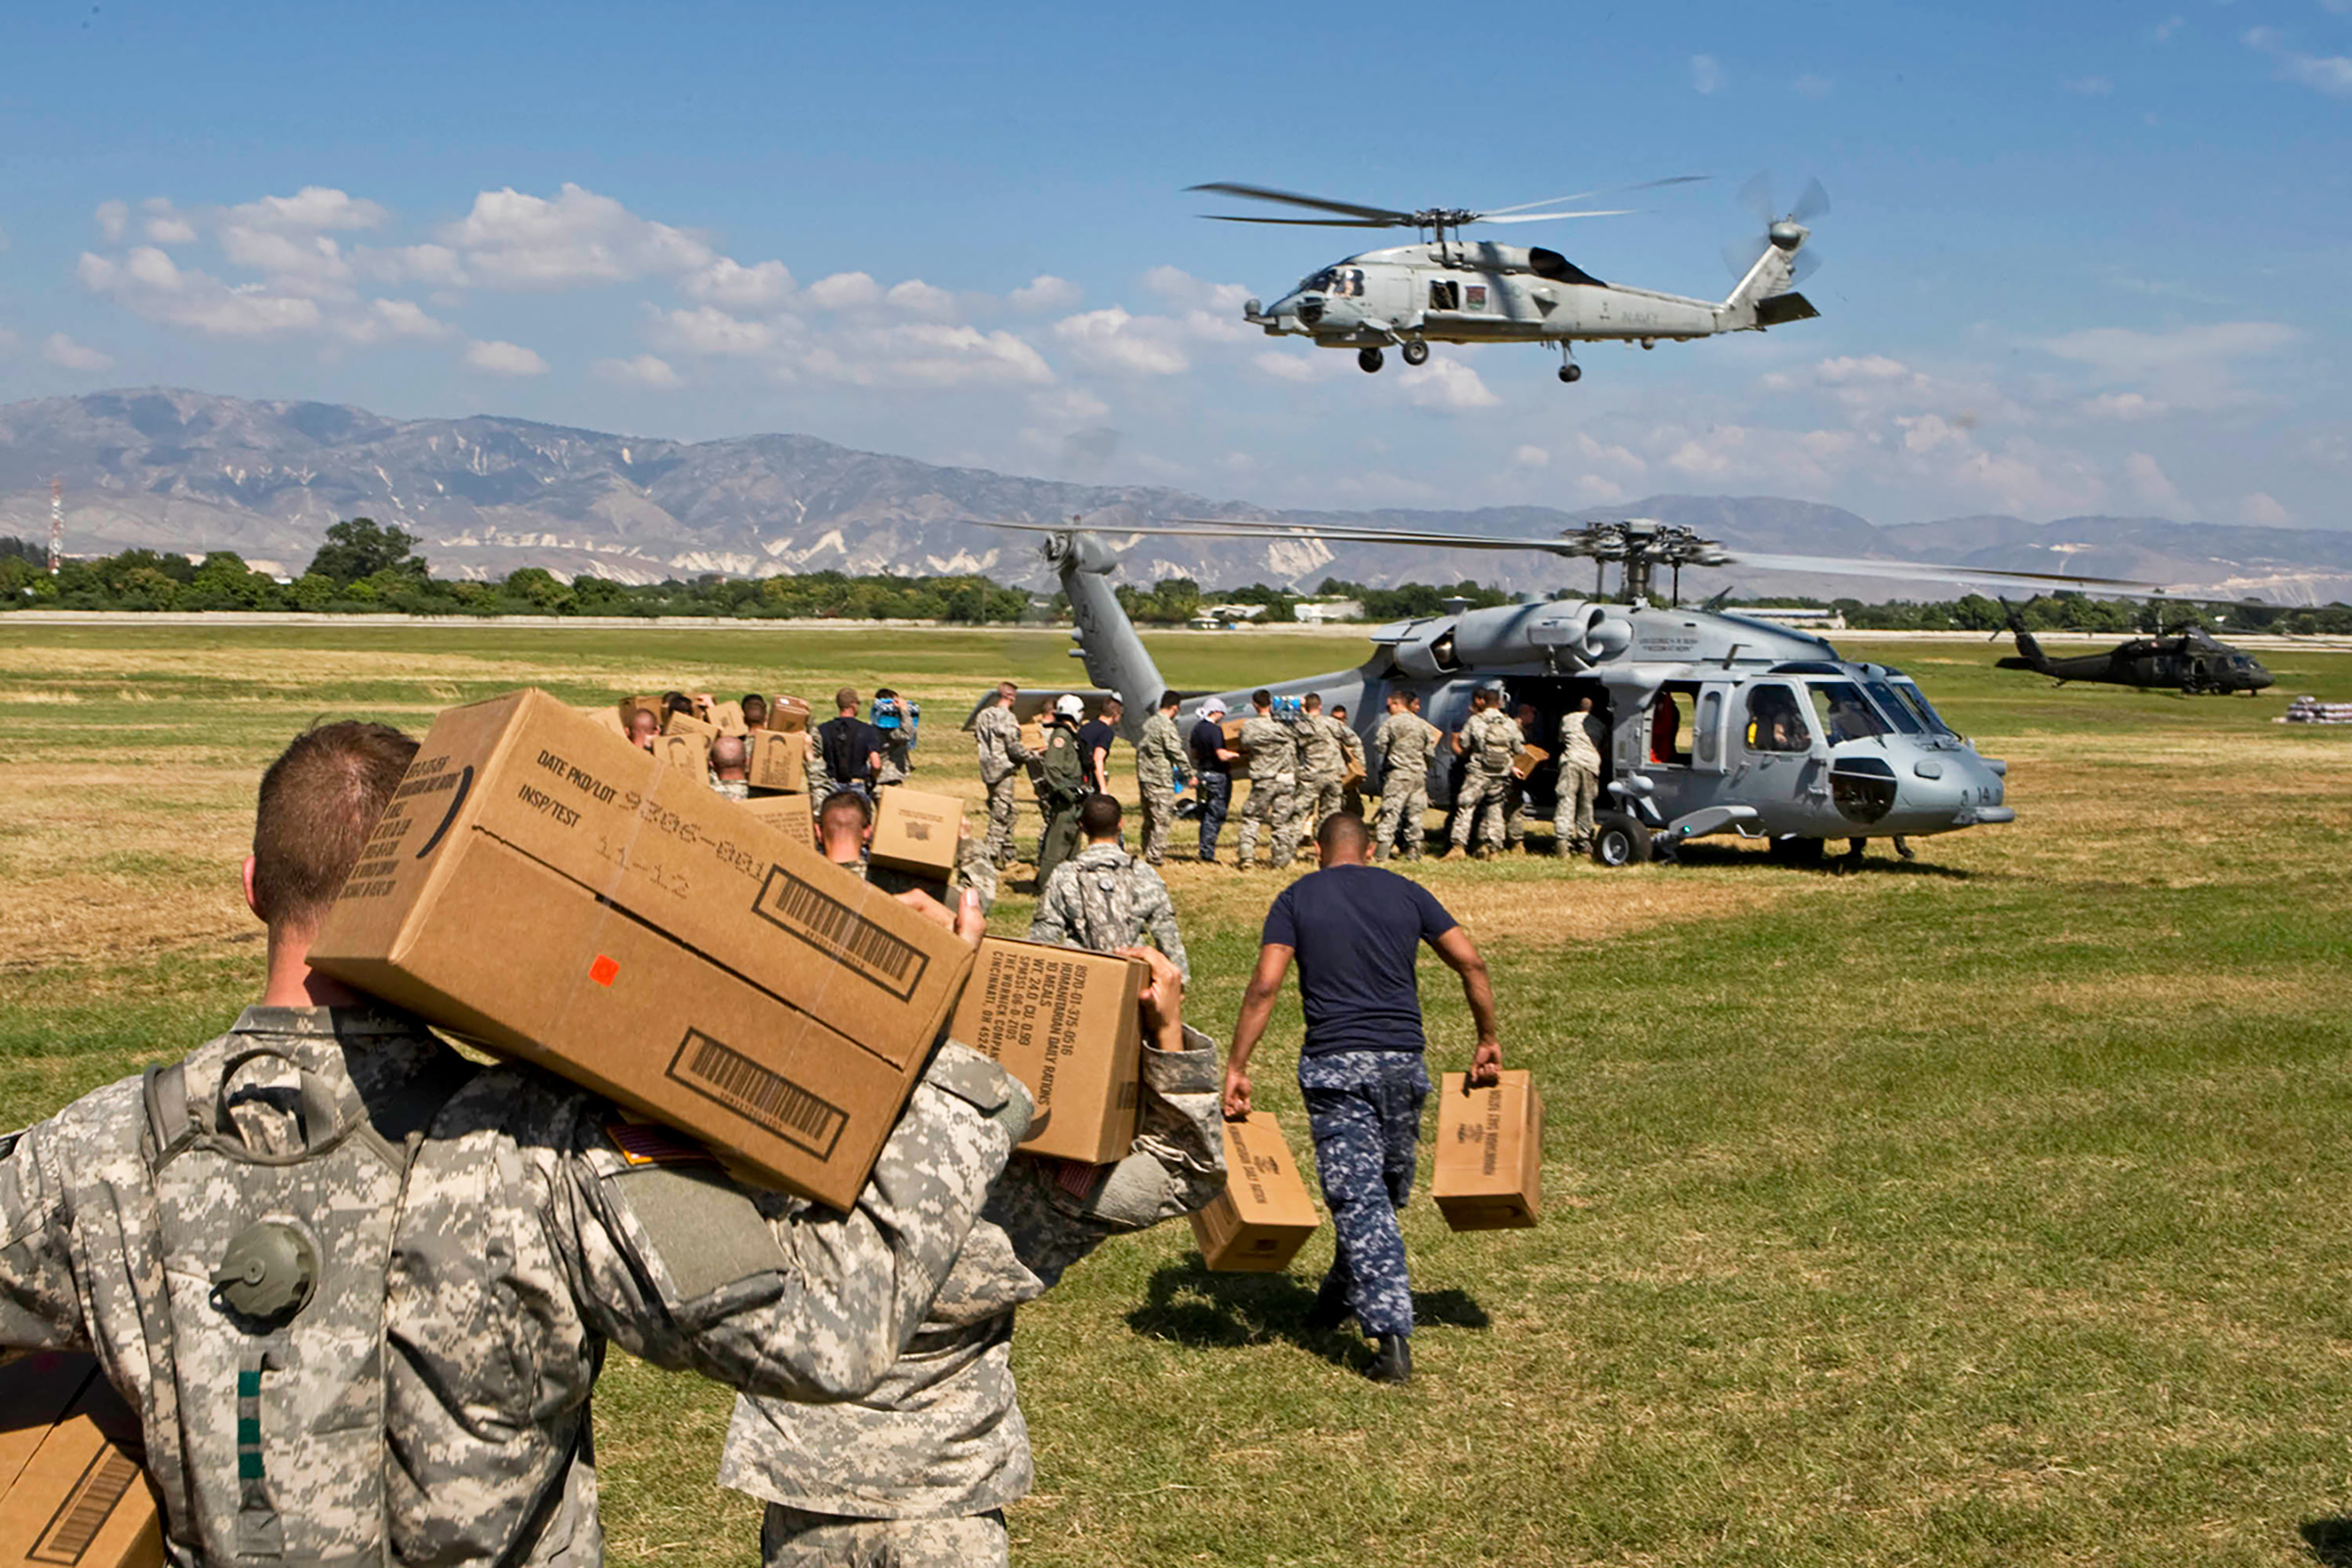 U.S. soldiers load aid onto a helicopter in January 2010 in Port-au-Prince, Haiti, after a devastating earthquake (Logan Abassi—MINUSTAH/Getty Images)